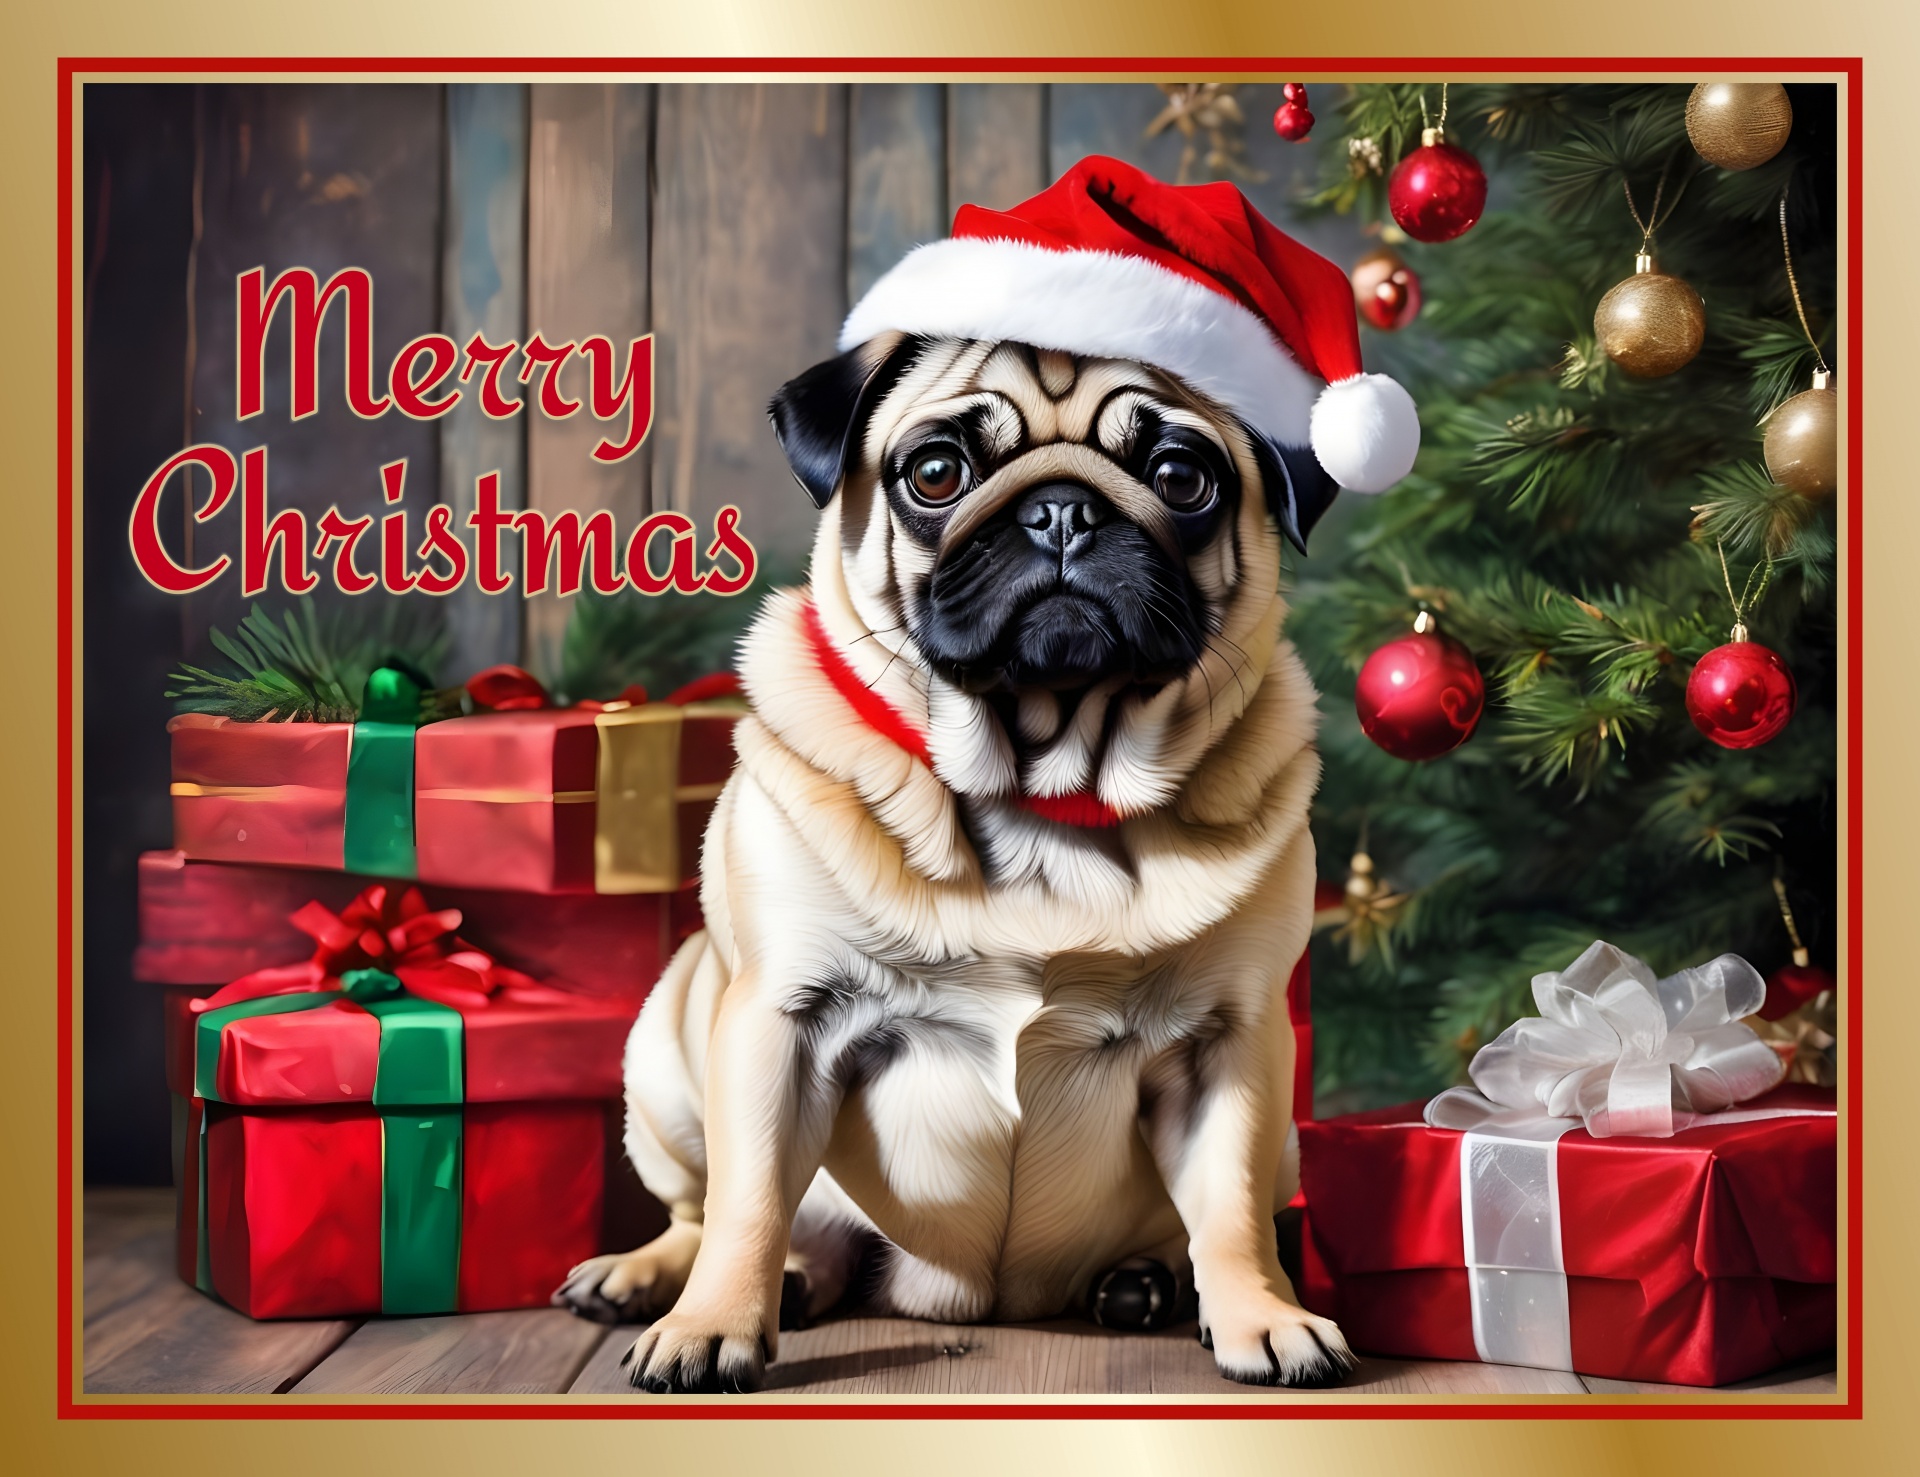 Christmas Pug Dog Gifts Free Stock Photo - Public Domain Pictures